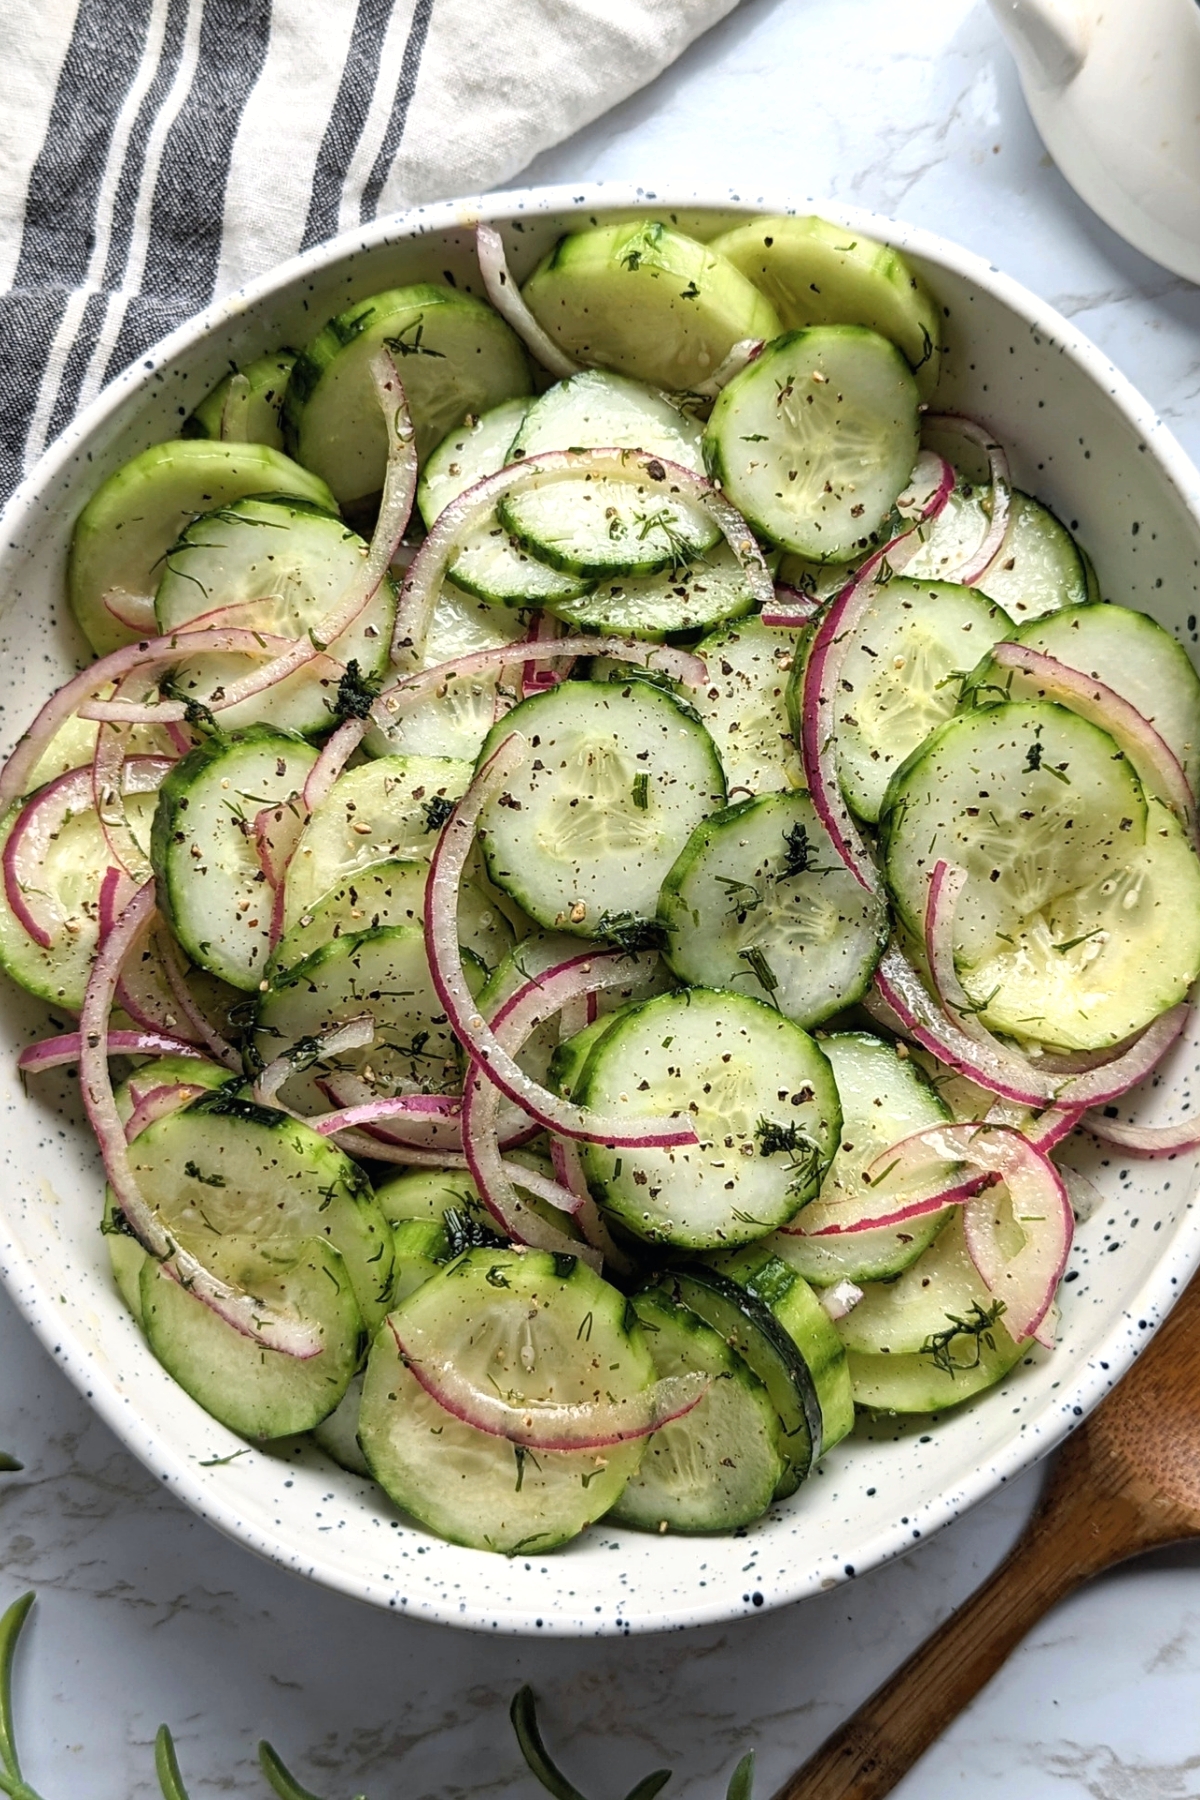 low sodium salads with cucumber and onions healthy salad recipe without salt cucumber and onion salad with vinegar and oil dressing